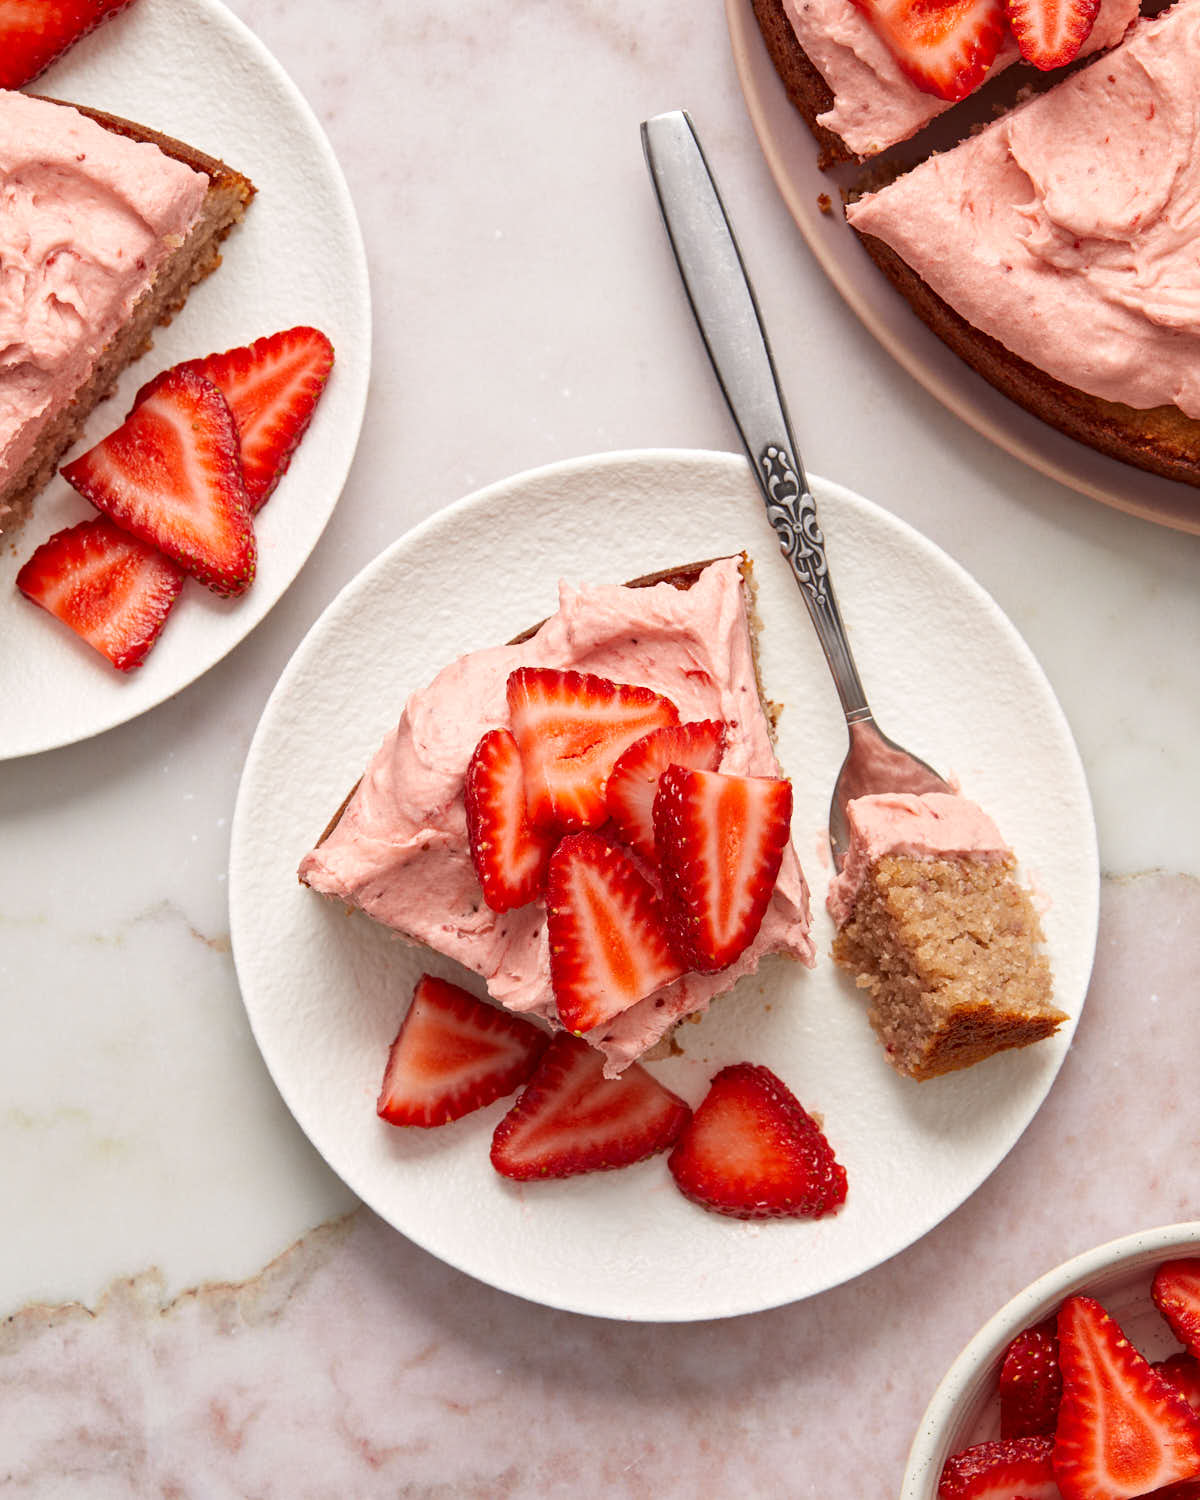 Overhead view of a slice of cake topped with strawberries and a fork removing a bite.